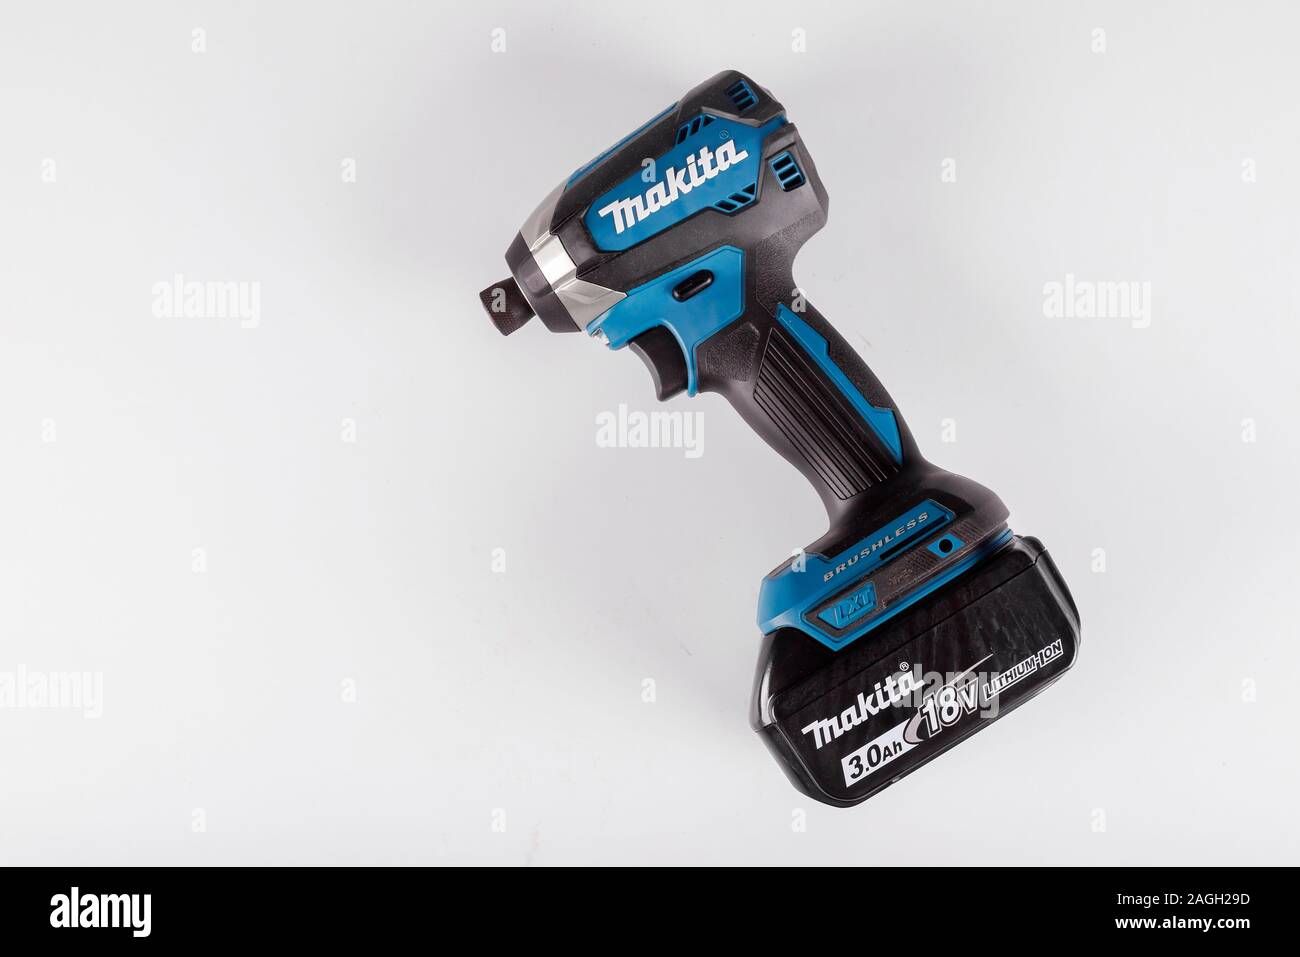 New York NY DEC 19 2019: Cordless brushless drill Makita Corporation is a  manufacturer of professional and consumer power tools in 1915, it is Anjo,  Japan Stock Photo - Alamy